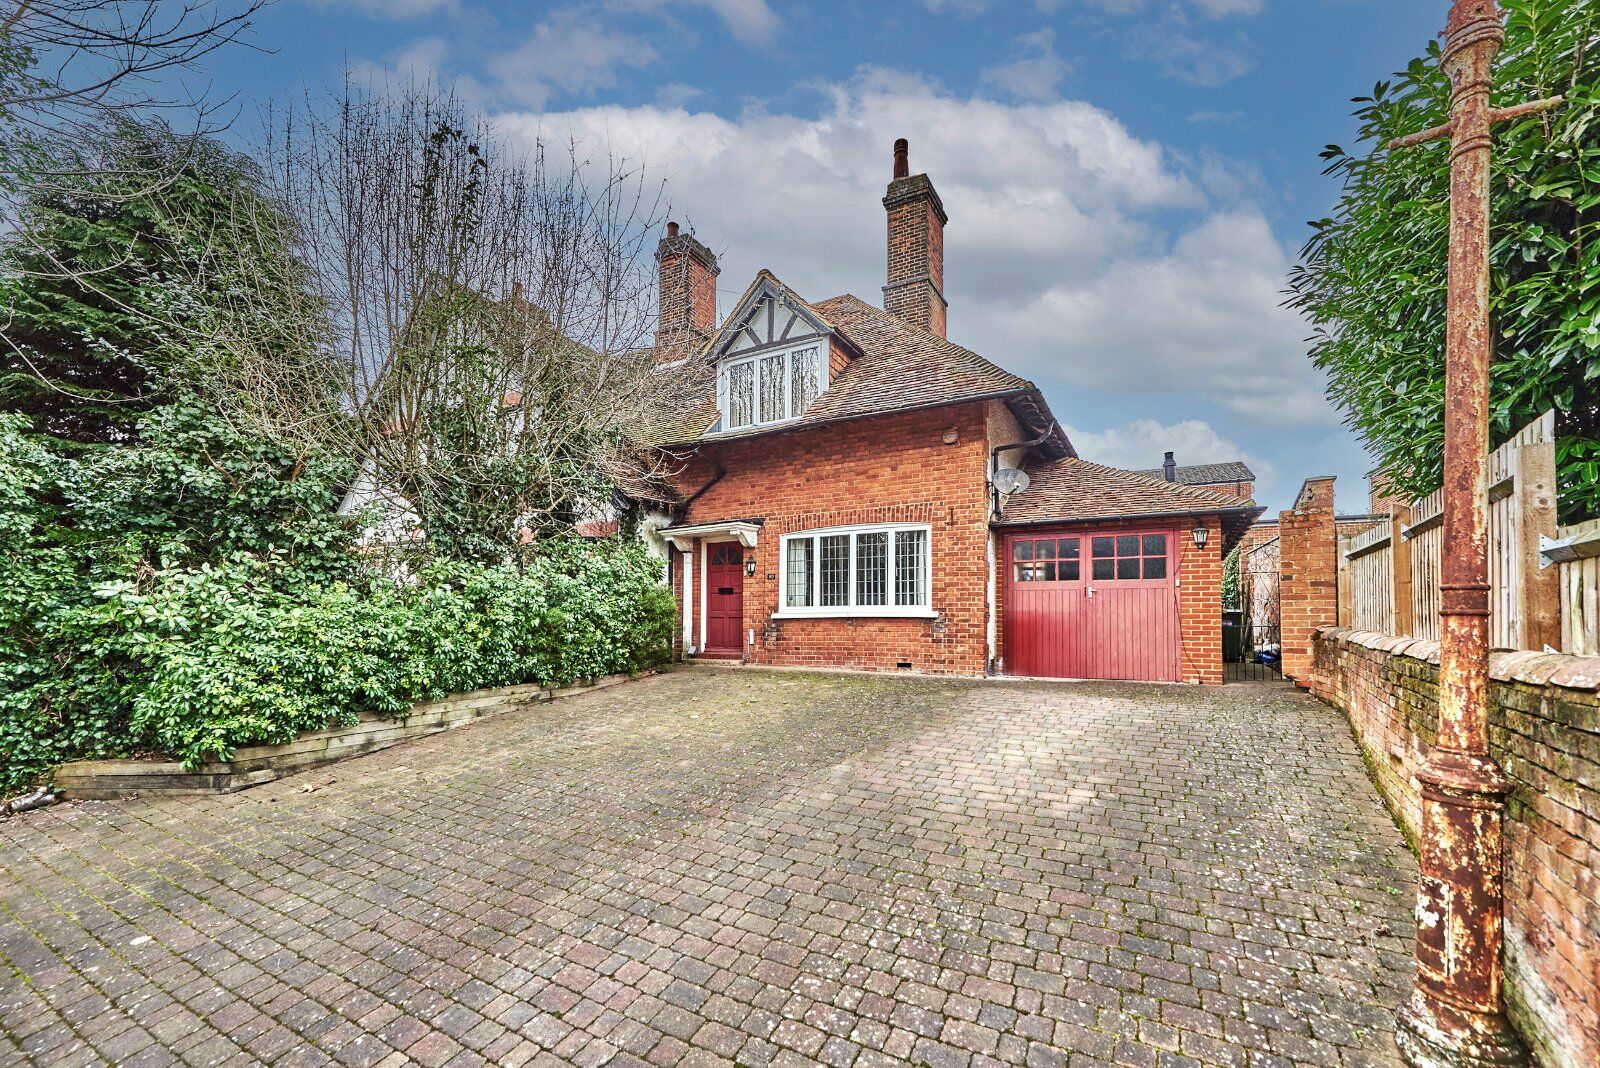 3 bedroom end terraced house for sale Lower Luton Road, Wheathampstead, AL4, main image